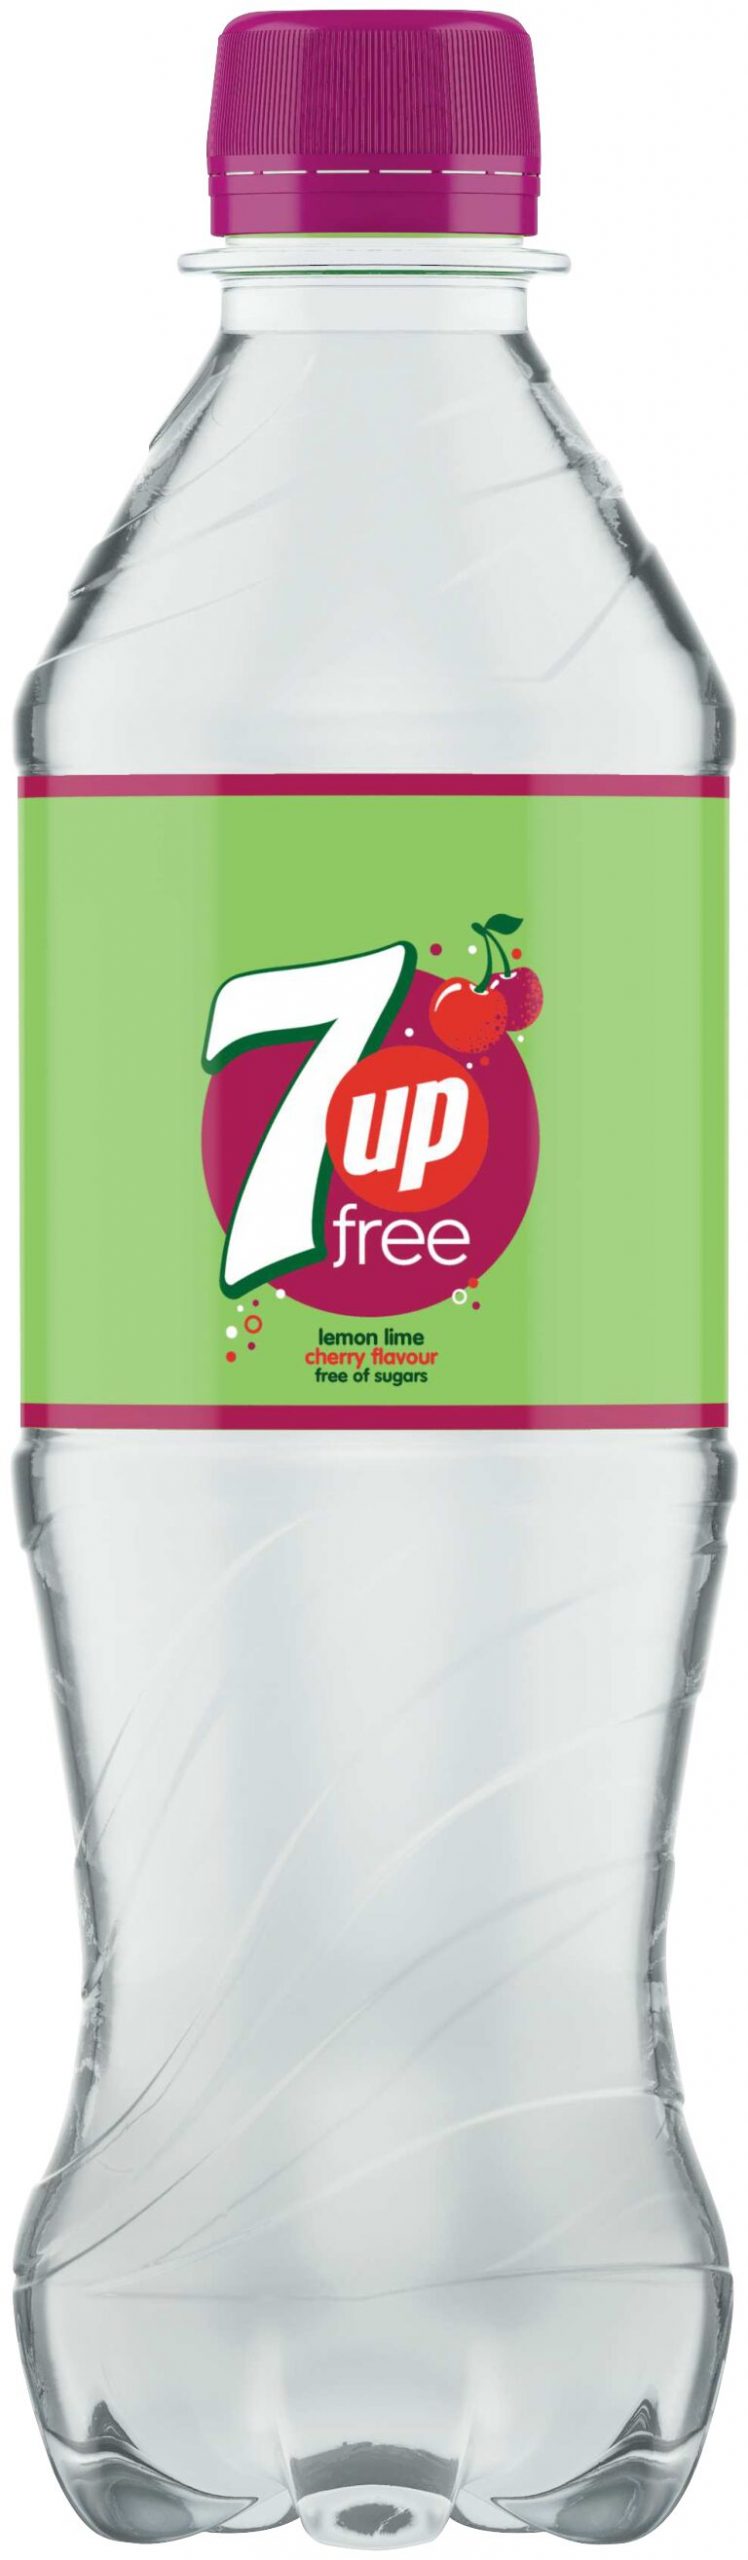 7UP Free Cherry in 500ml bottle